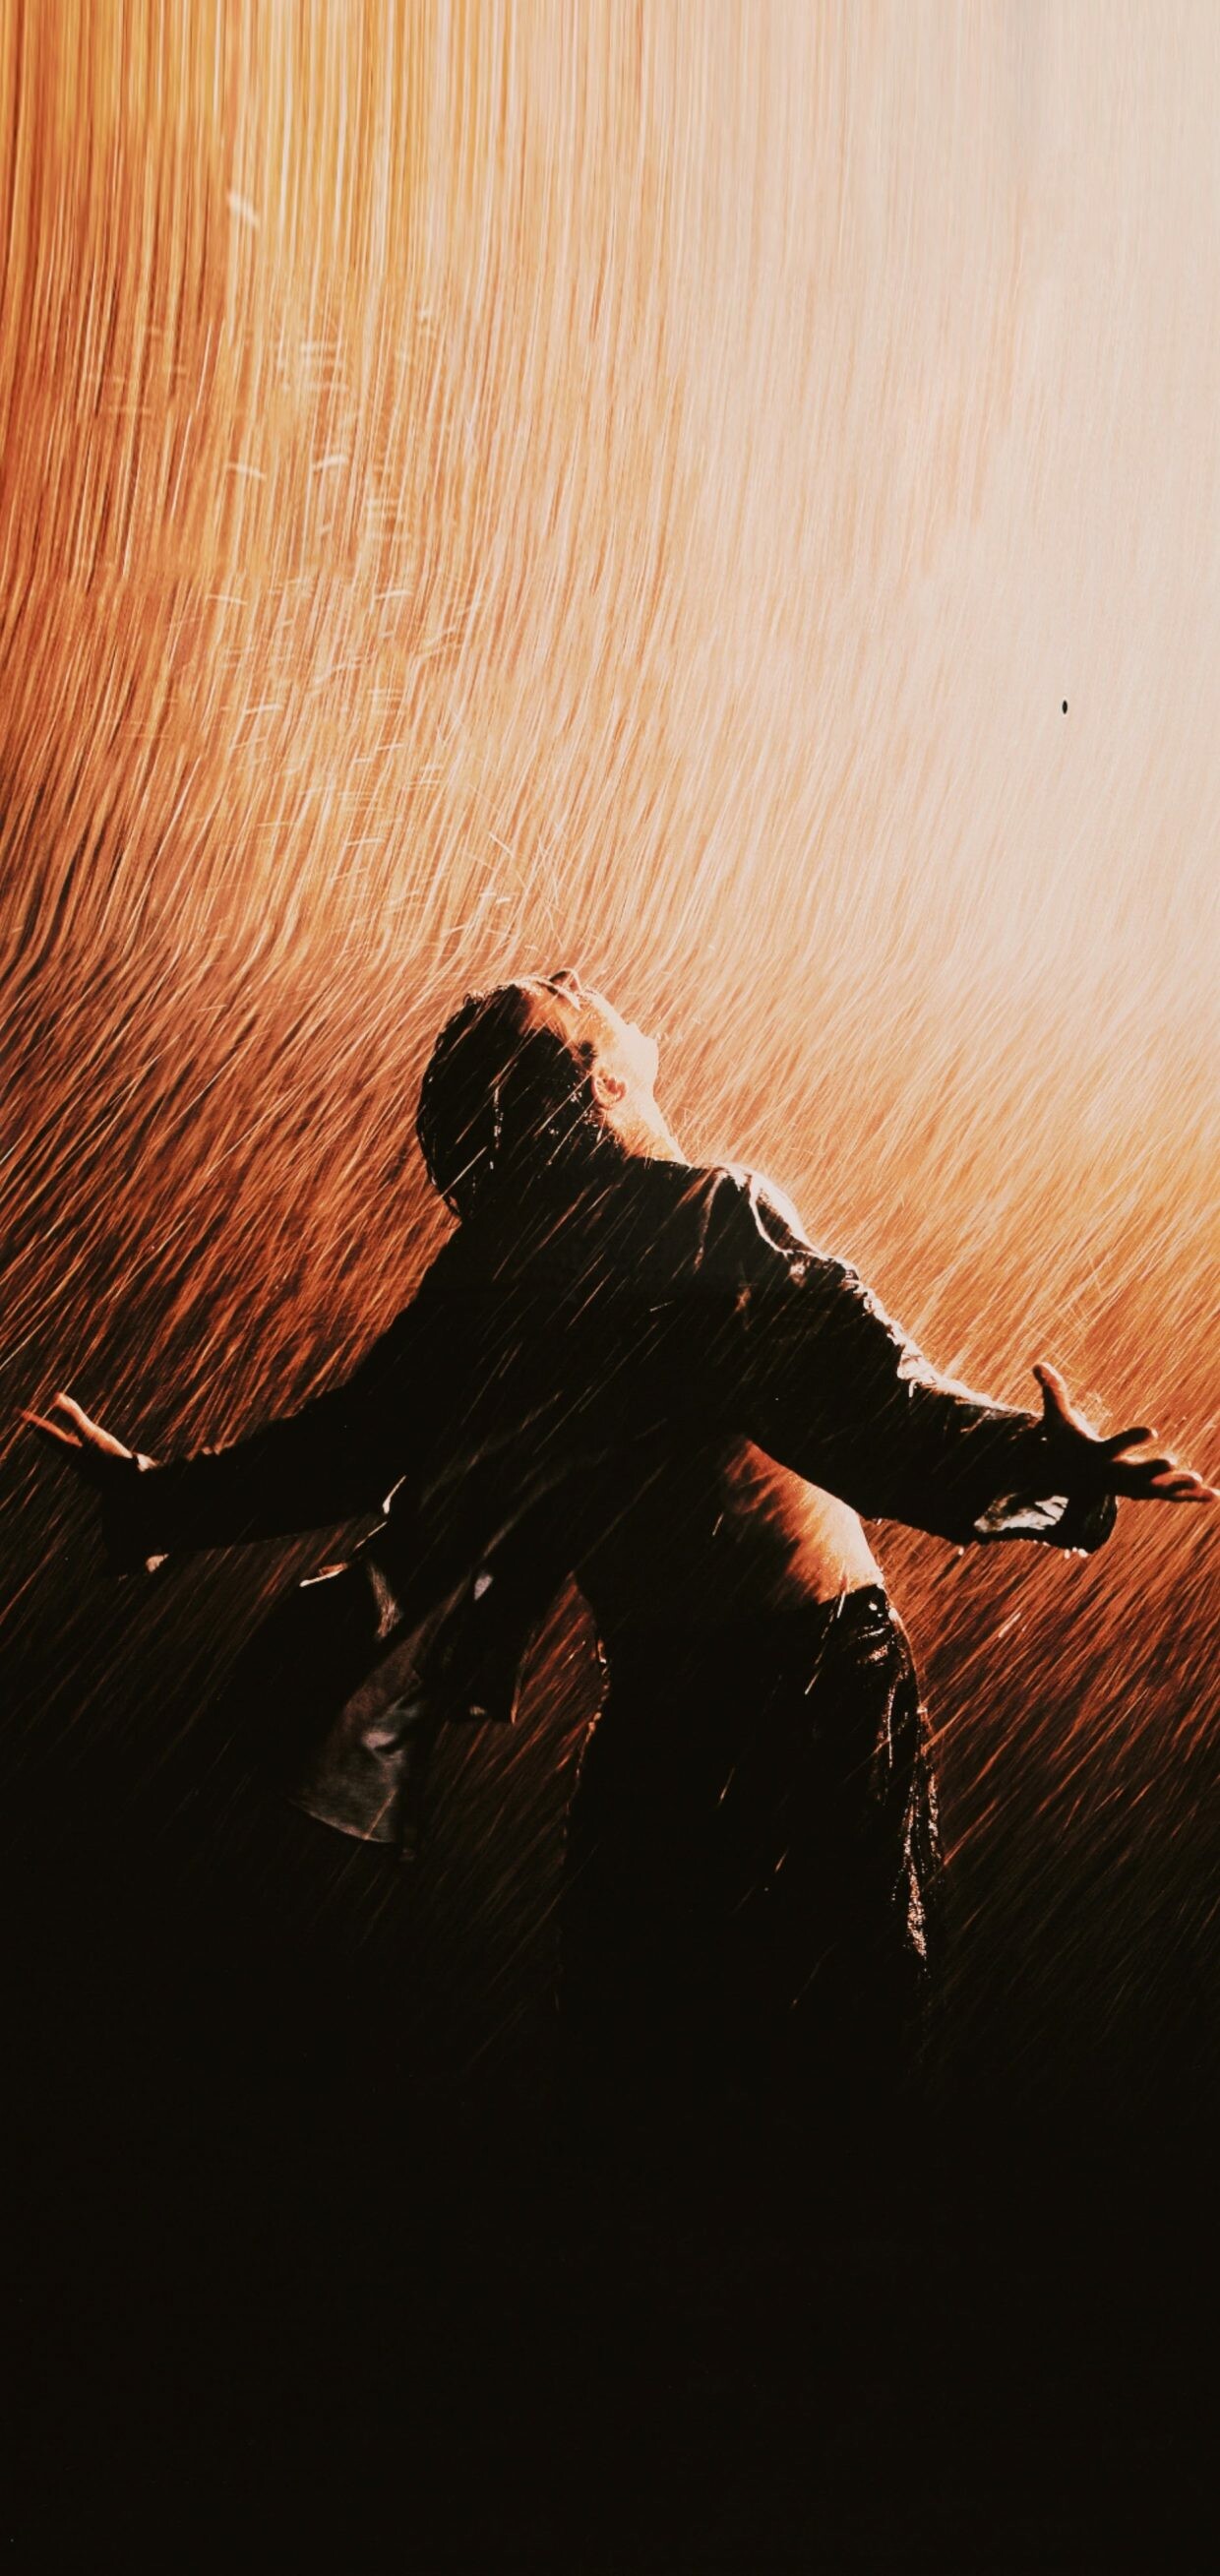 The Shawshank Redemption: The film began a limited North American release on September 23, 1994. 1240x2620 HD Wallpaper.